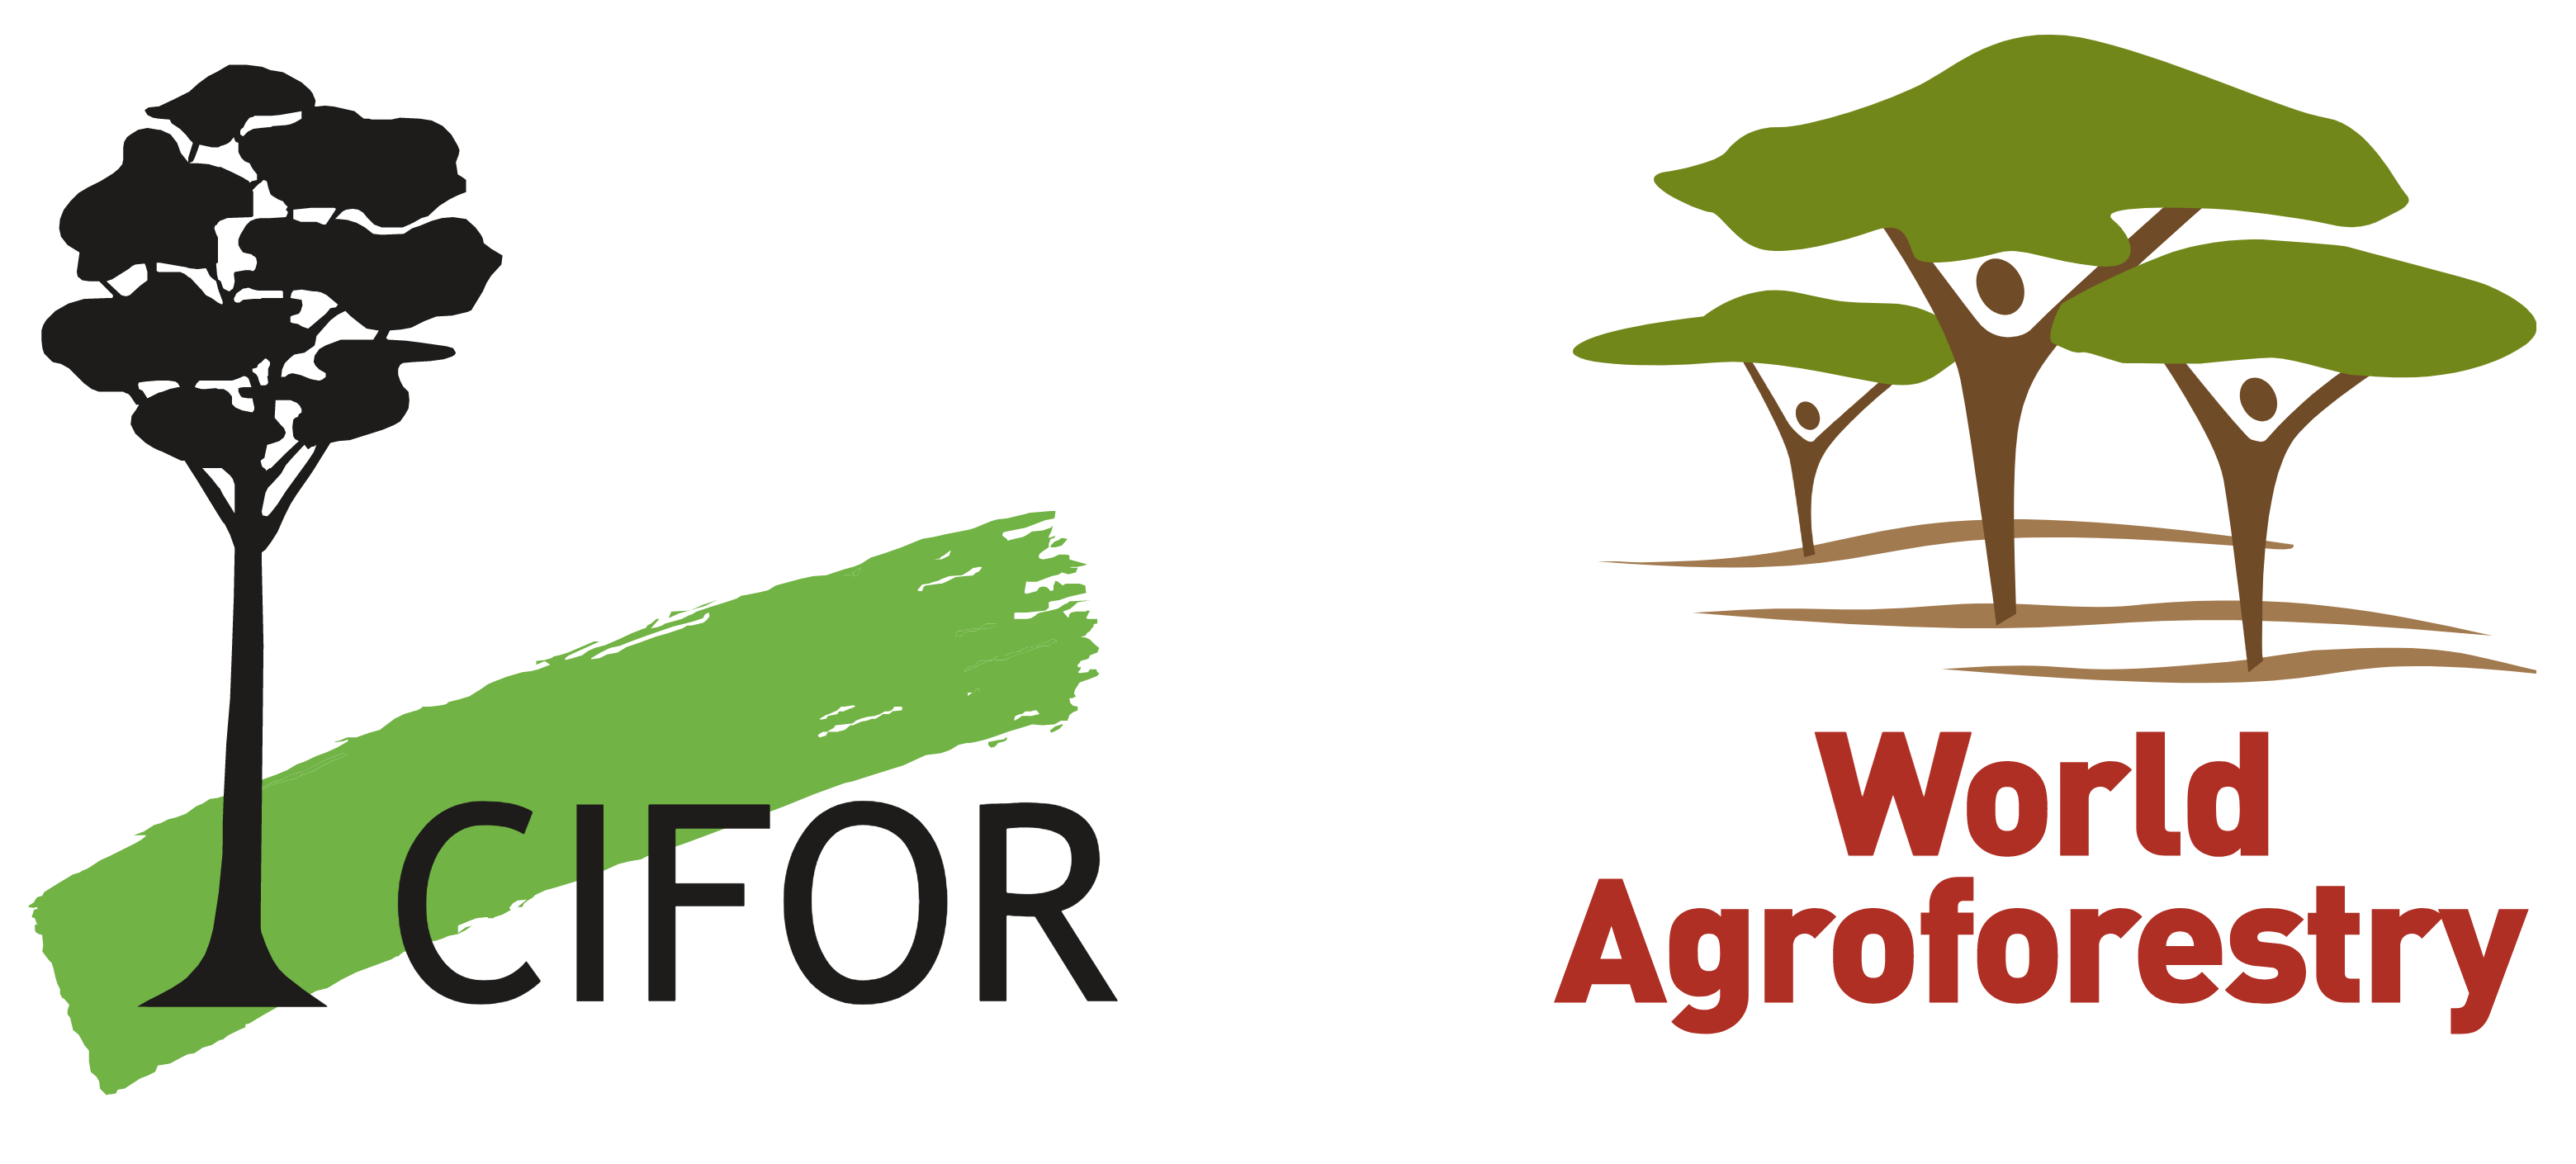 Center for International Forestry Research and World Agroforestry